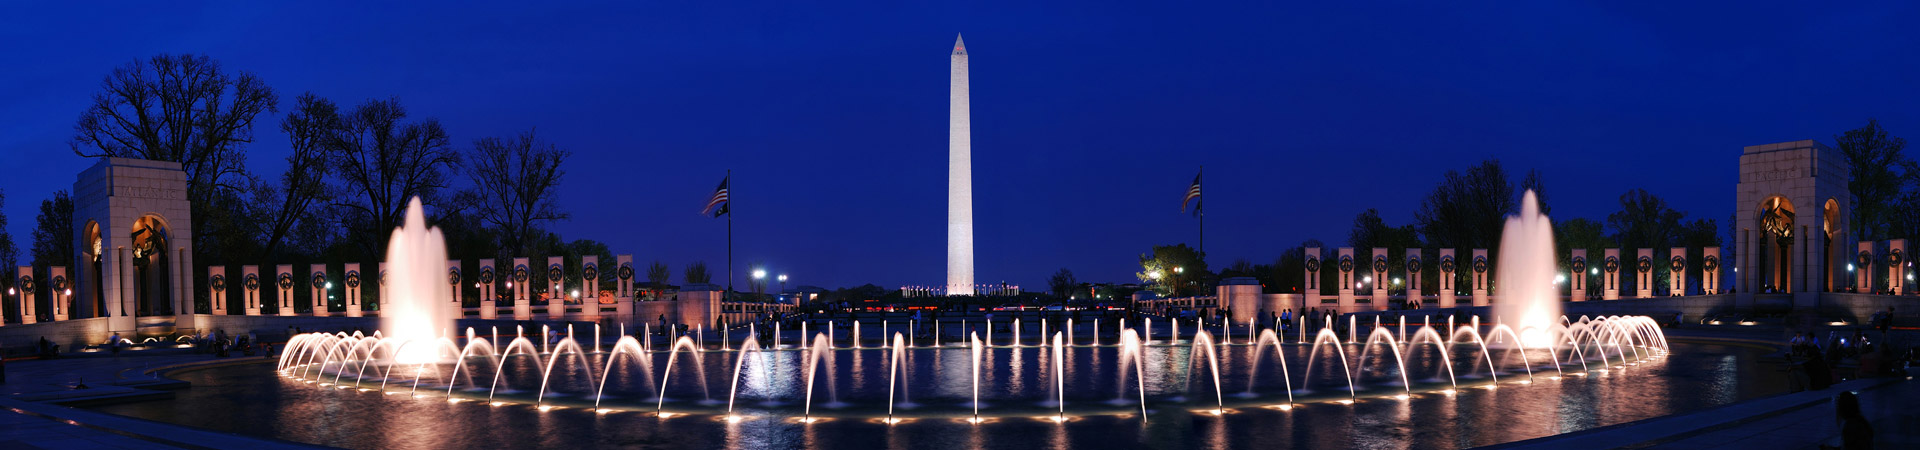  WWII National Monument fountain overlooking the Washington Monument at night 